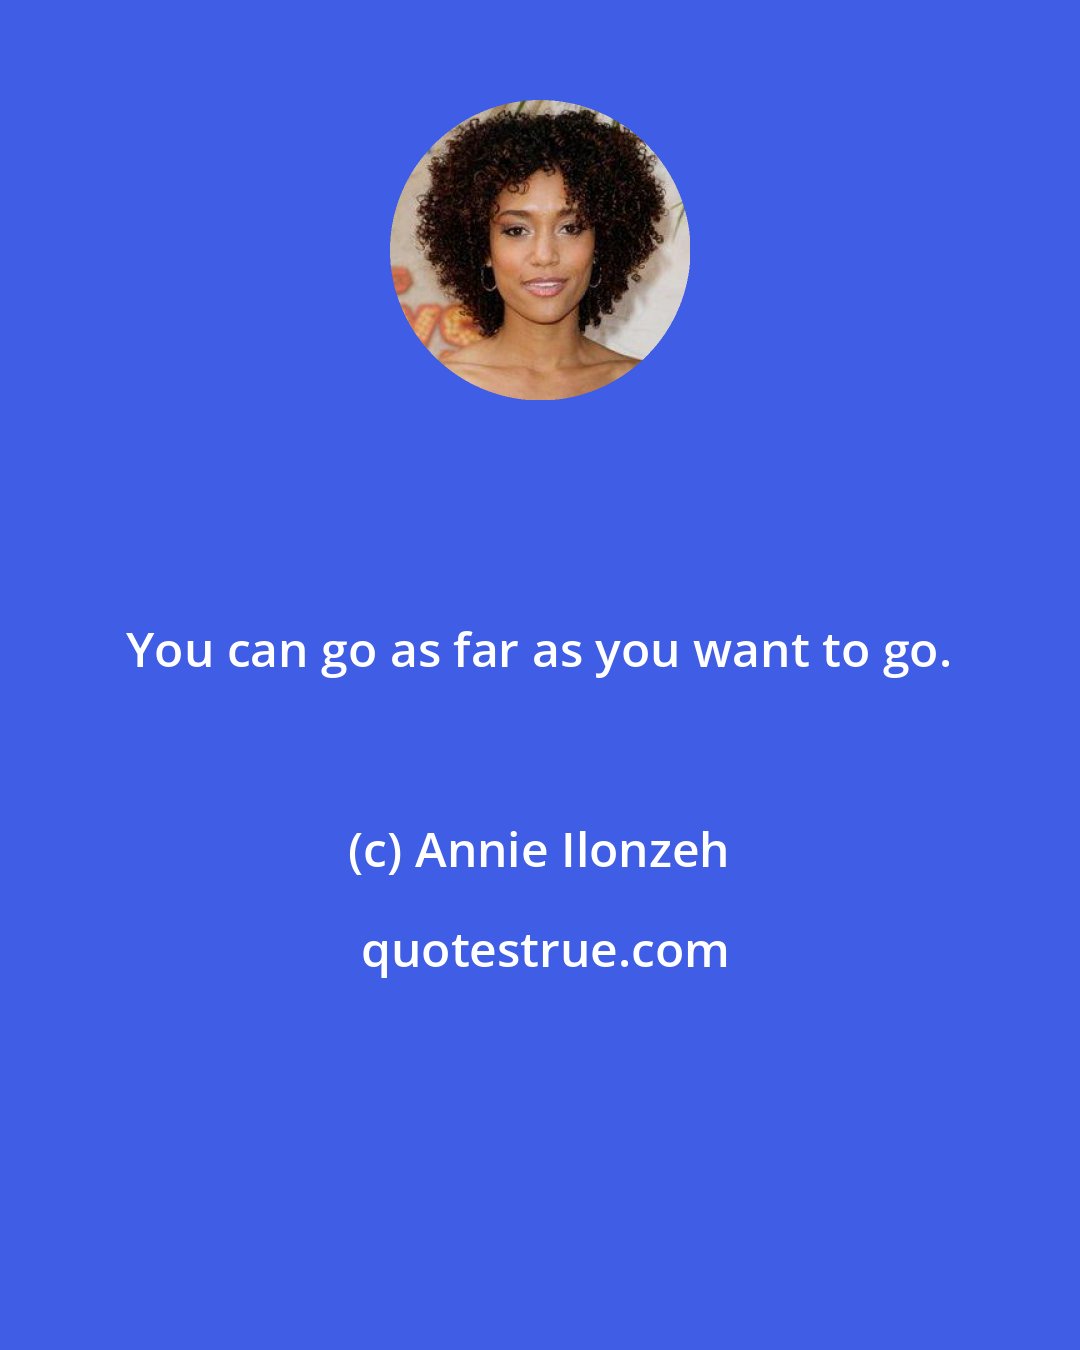 Annie Ilonzeh: You can go as far as you want to go.